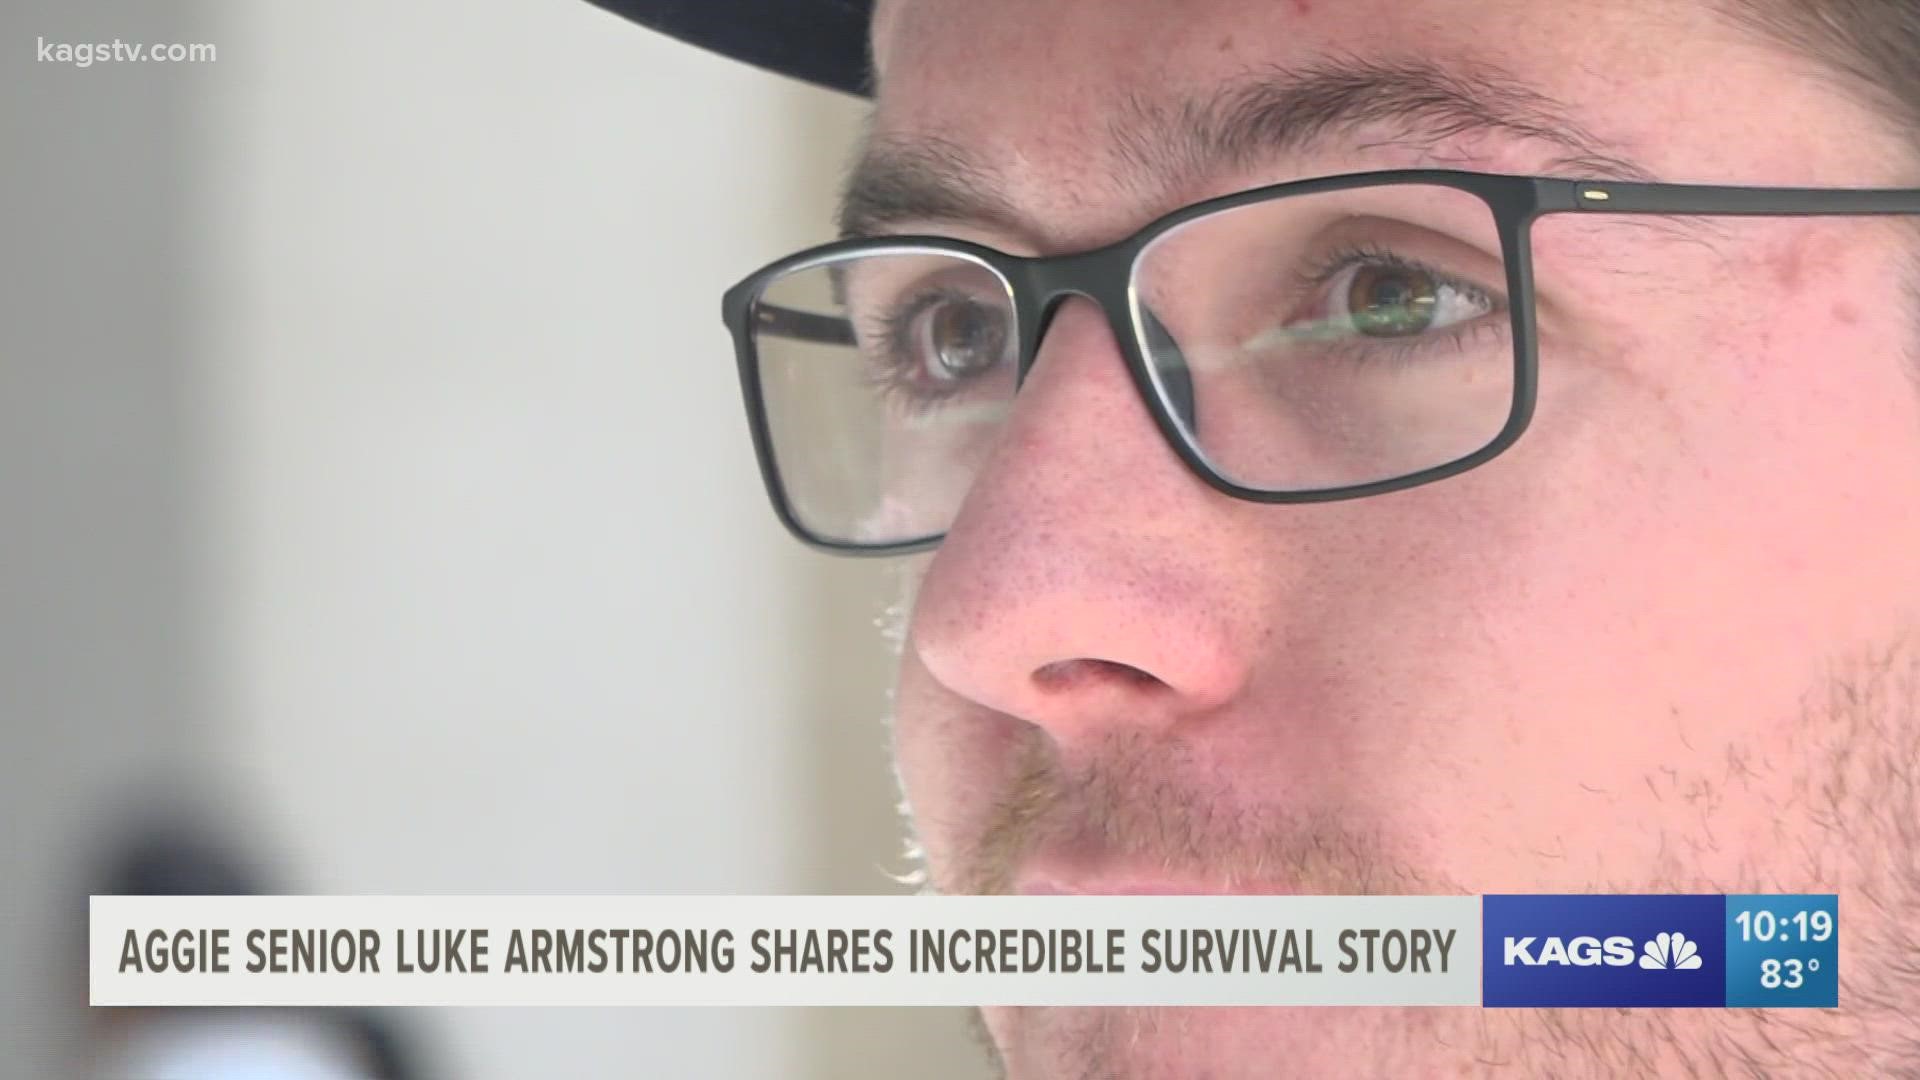 Luke Armstrong, the lone survivor from the tragedy, is still recovering as he readies for classes